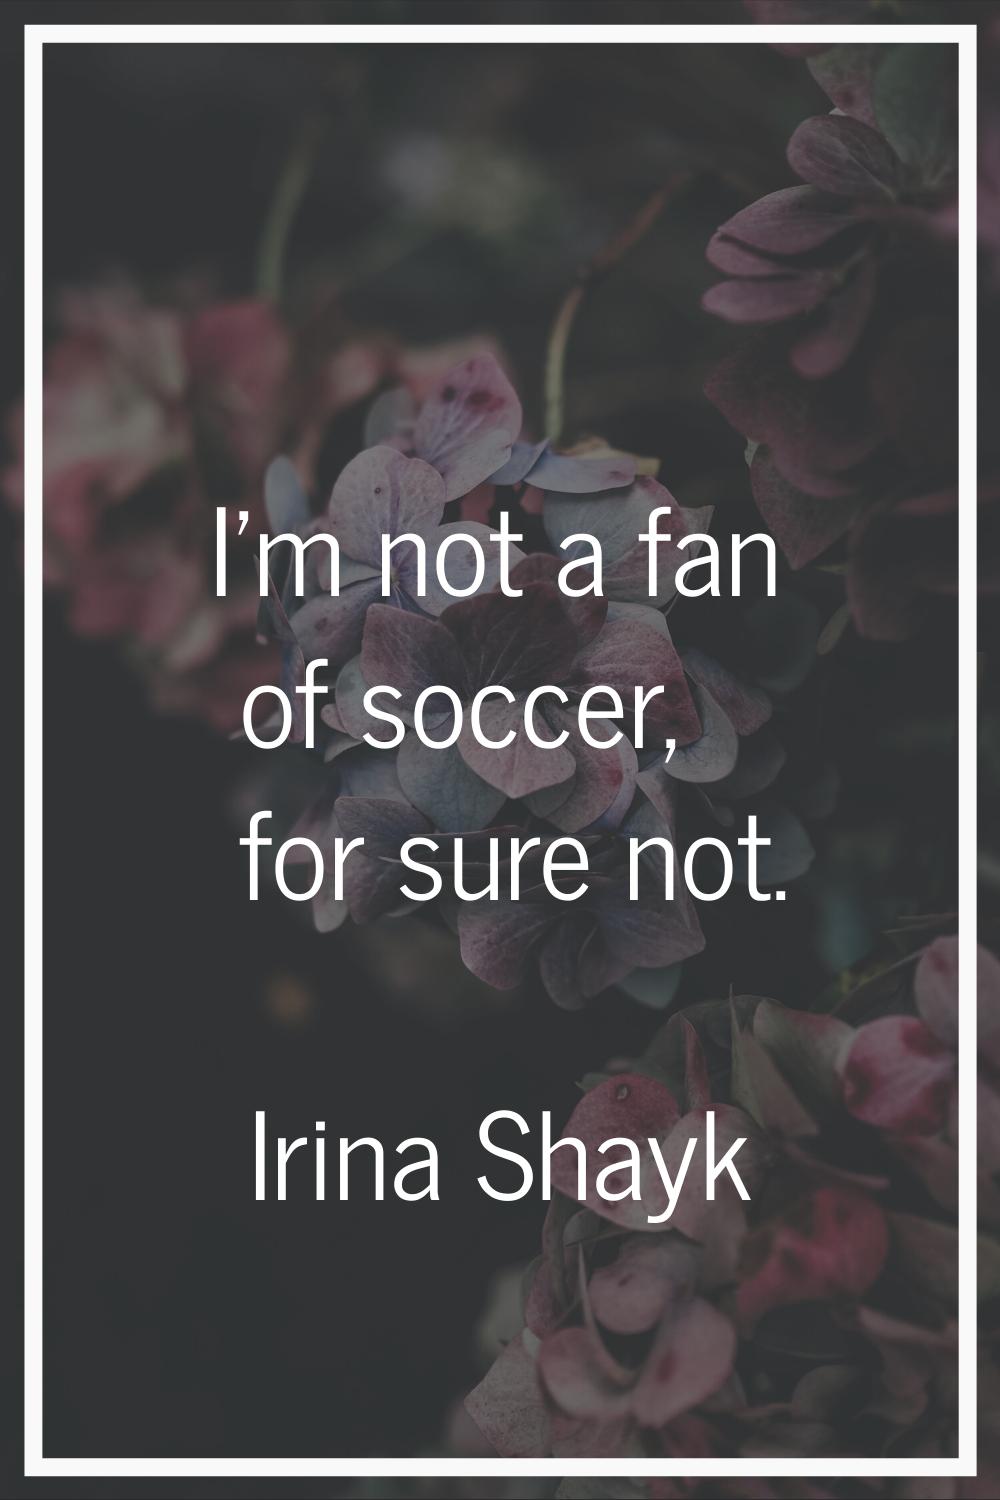 I'm not a fan of soccer, for sure not.